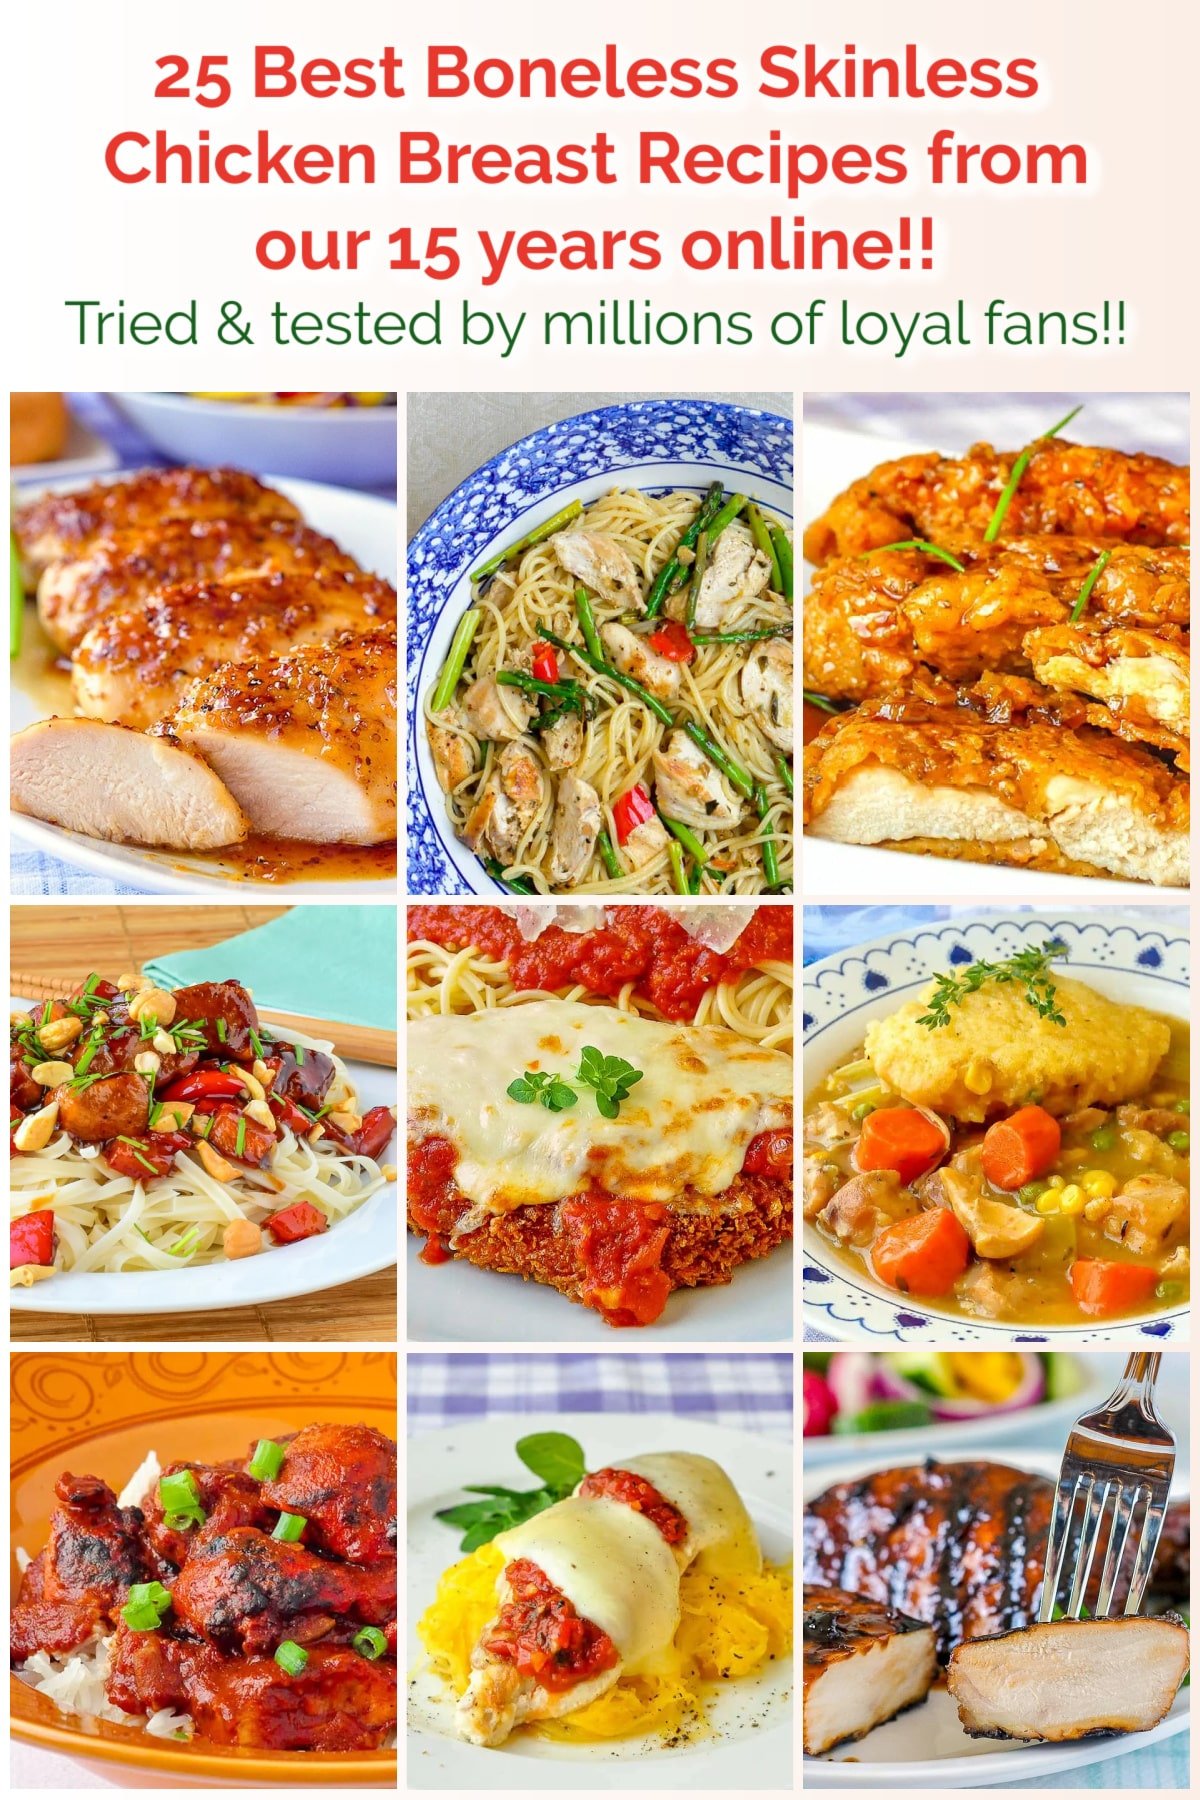 Top ten boneless skinless chicken breast recipes collage with title text added for Pinterest